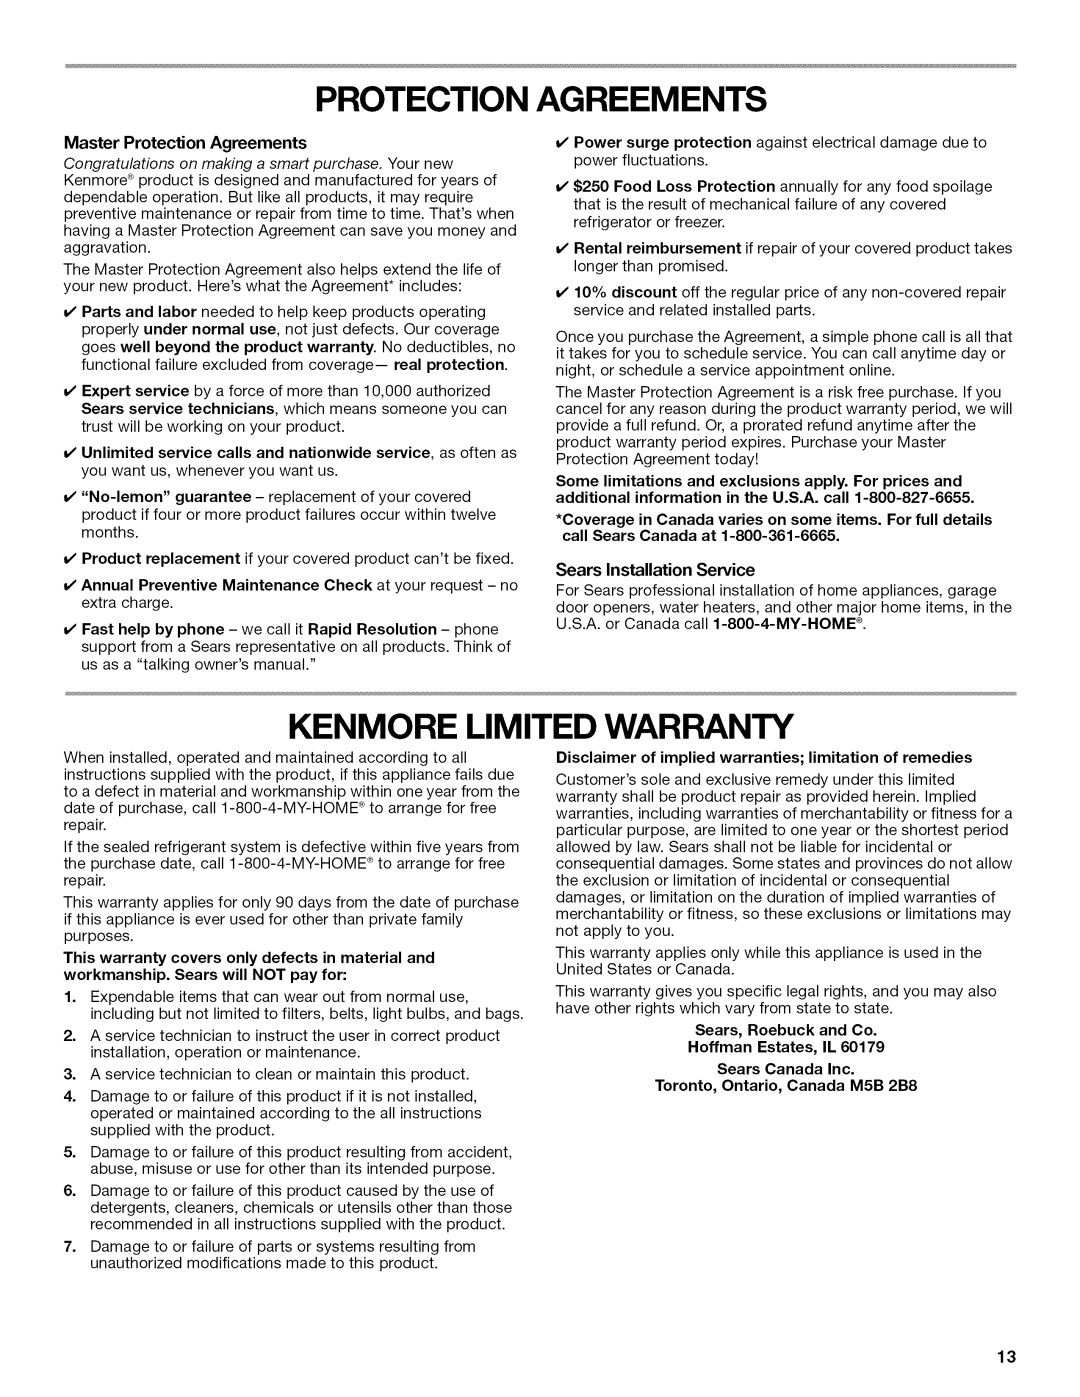 Kenmore 10646033801, W10192868A, 10646033800, 10645423800, 10645432800 manual Protection Agreements, Kenmore Limited Warranty 